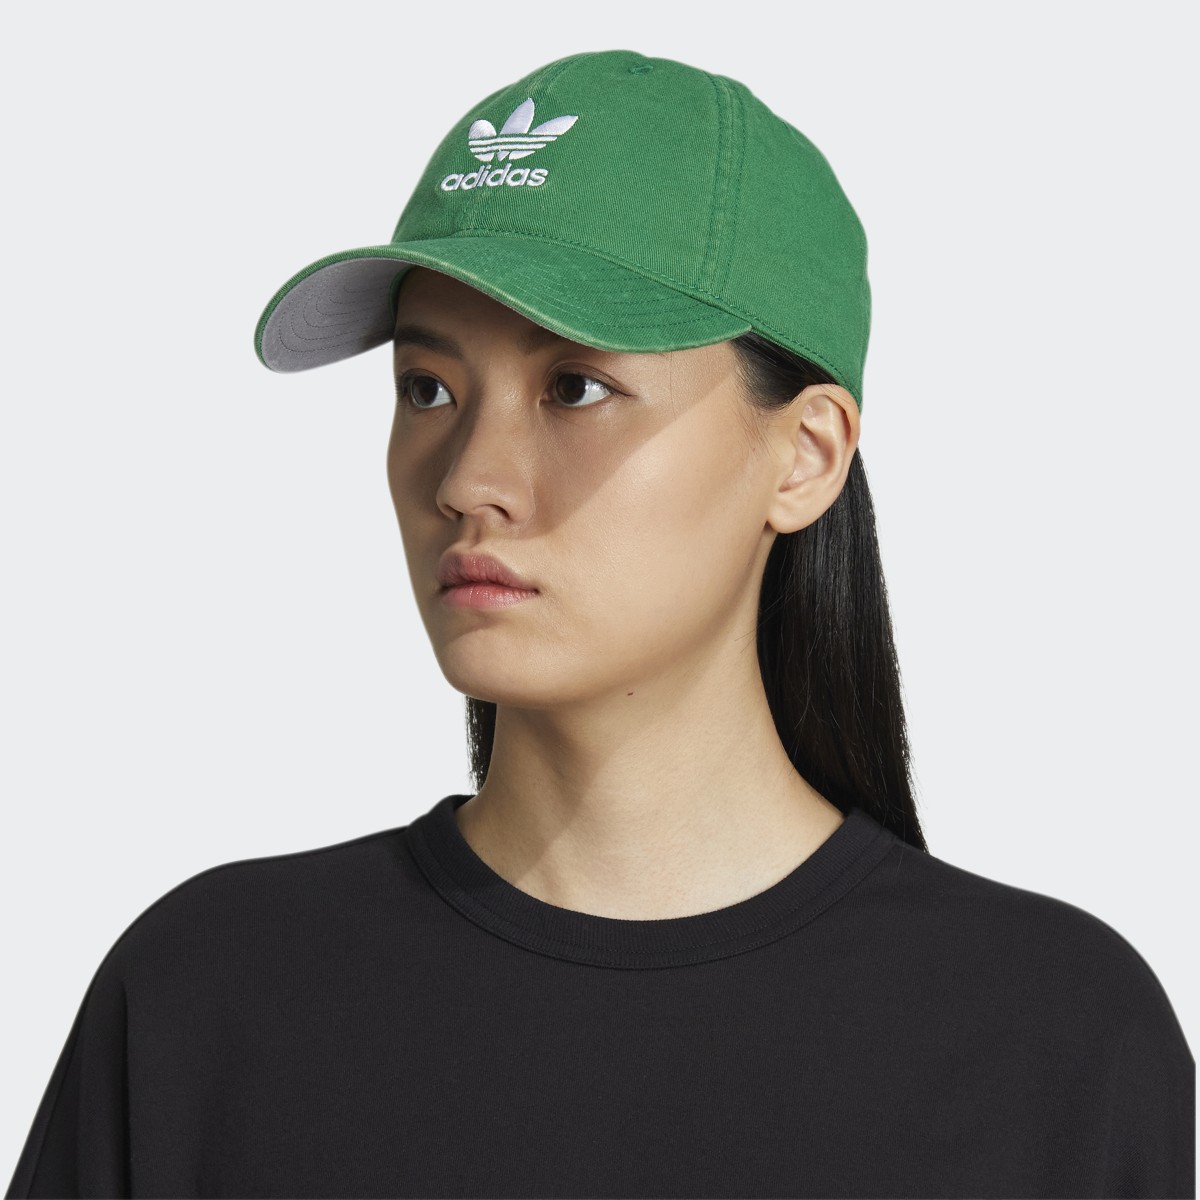 Adidas Relaxed Strap Back Hat. 5